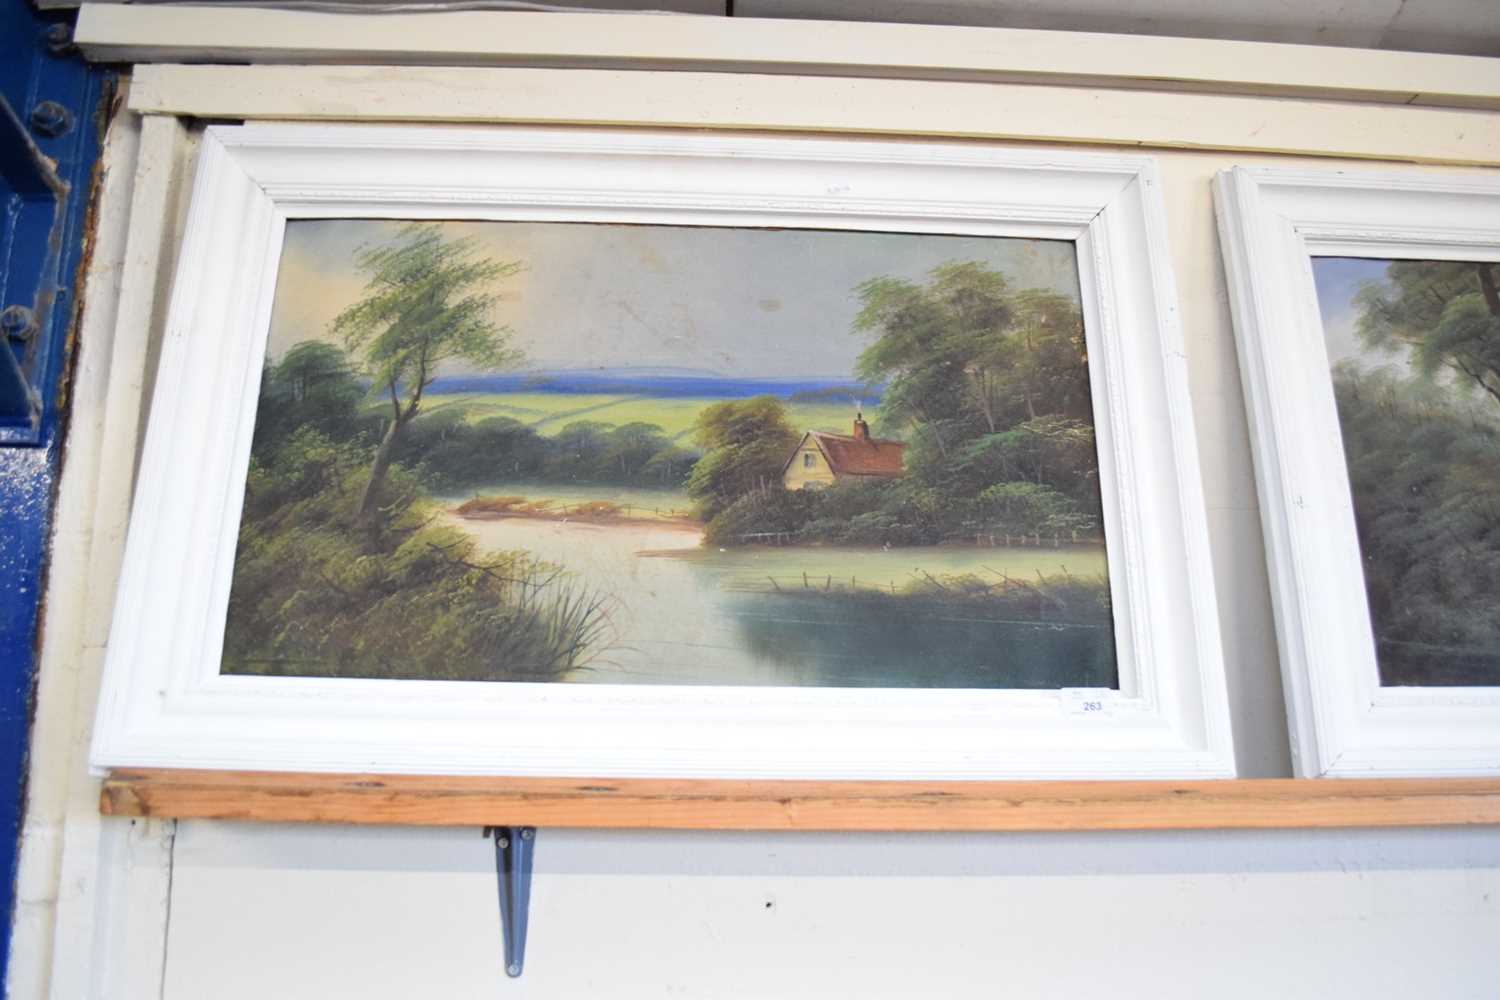 LATE 19TH/EARLY 20TH CENTURY BRITISH SCHOOL, PAIR OF STUDIES, RIVER SCENE WITH BRIDGE AND COTTAGE BY